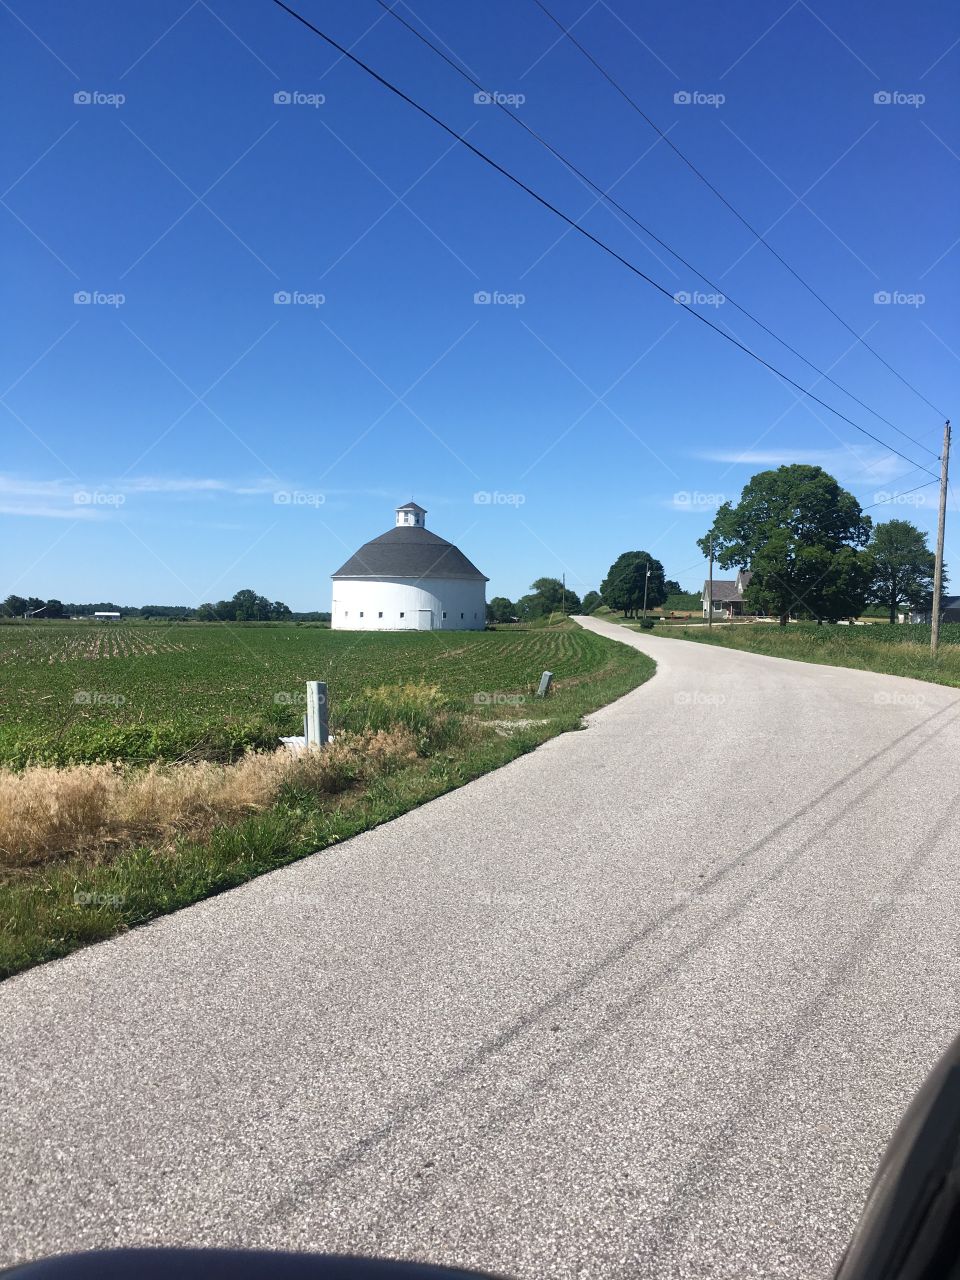 Round barn in Indiana